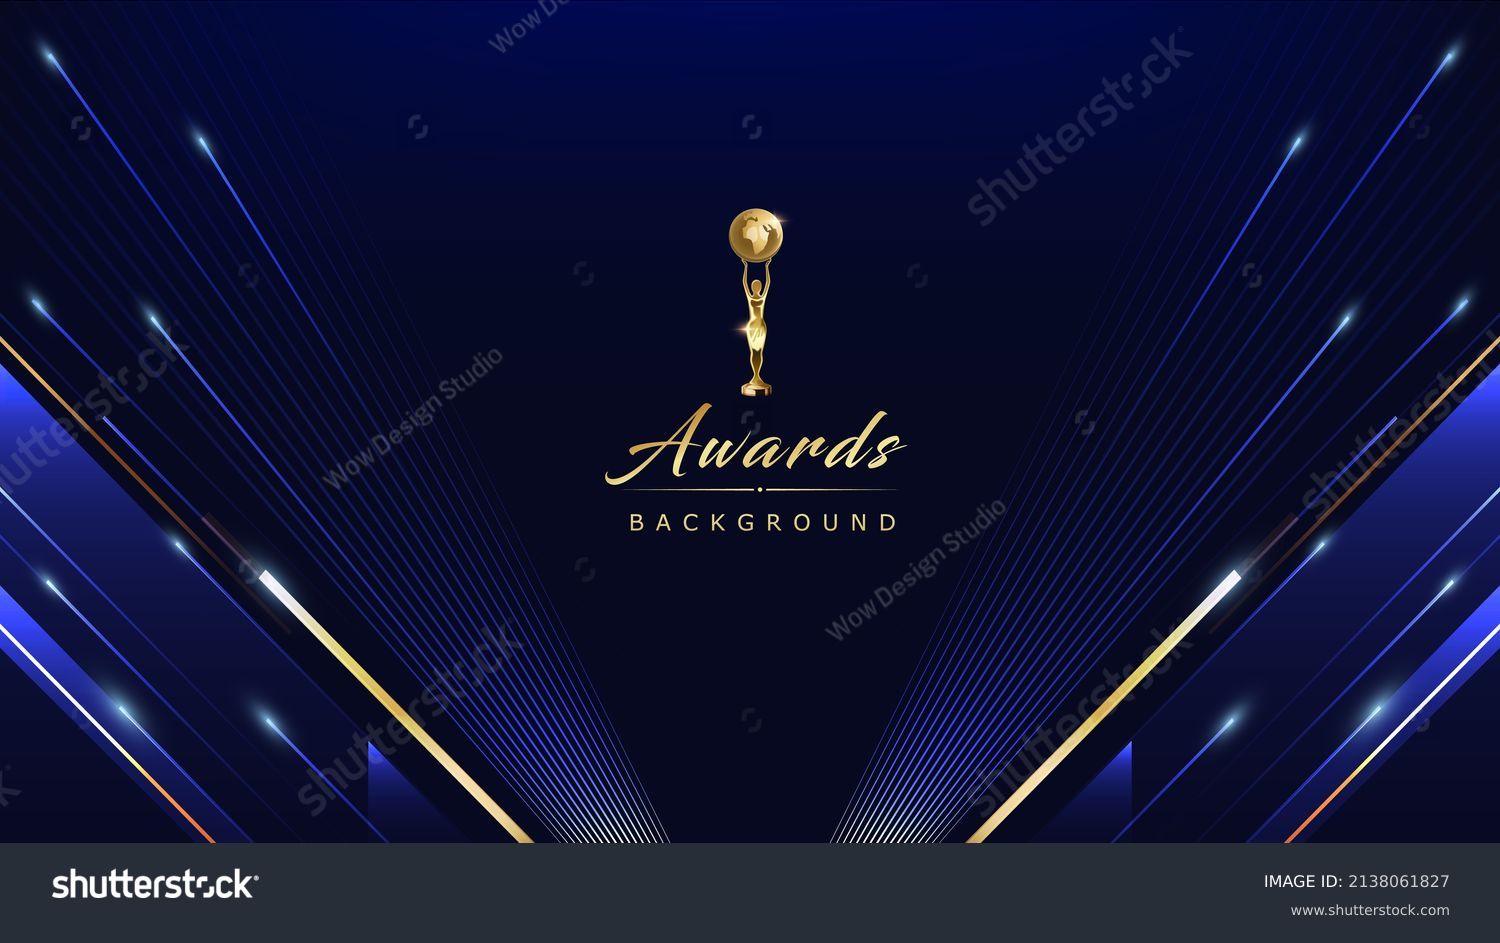 Dark Blue Golden Royal Awards Graphics Background. Lines Growing Elegant Shine Spark. Luxury Premium Corporate Abstract Design Template. Classic Shape Post. Center LED Screen Visual. Lights Fireworks  #2138061827